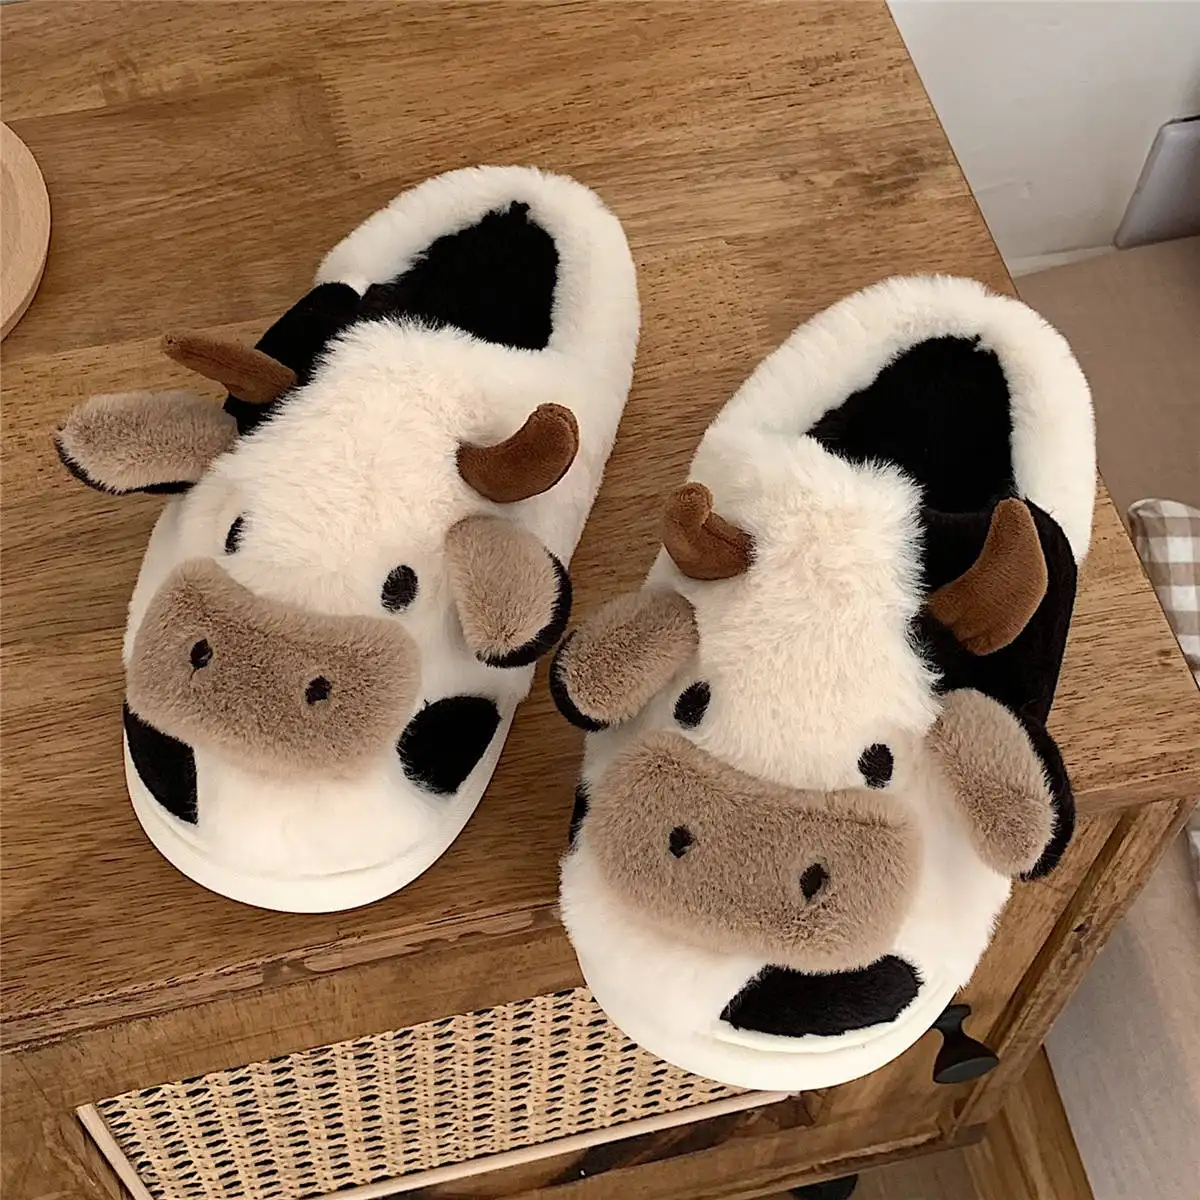 Comfortable Cows Plush Slippers Winter CPC Cute Milk Cow fuzzy plush home Slipper OEM/ODM Soft Kids Cow Slippers For Women